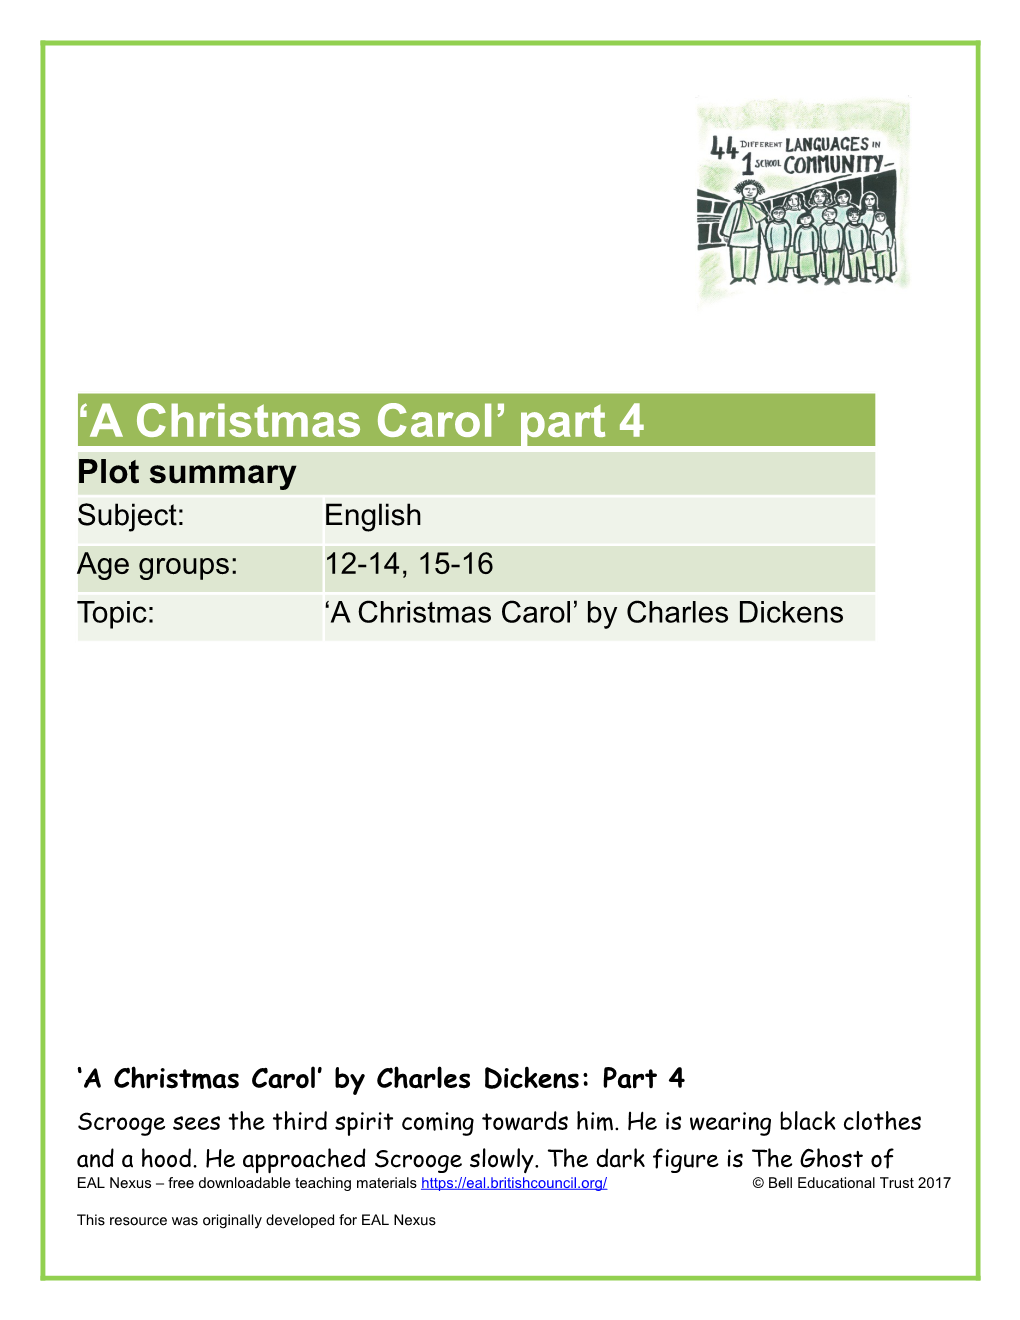 A Christmas Carol by Charles Dickens: Part4